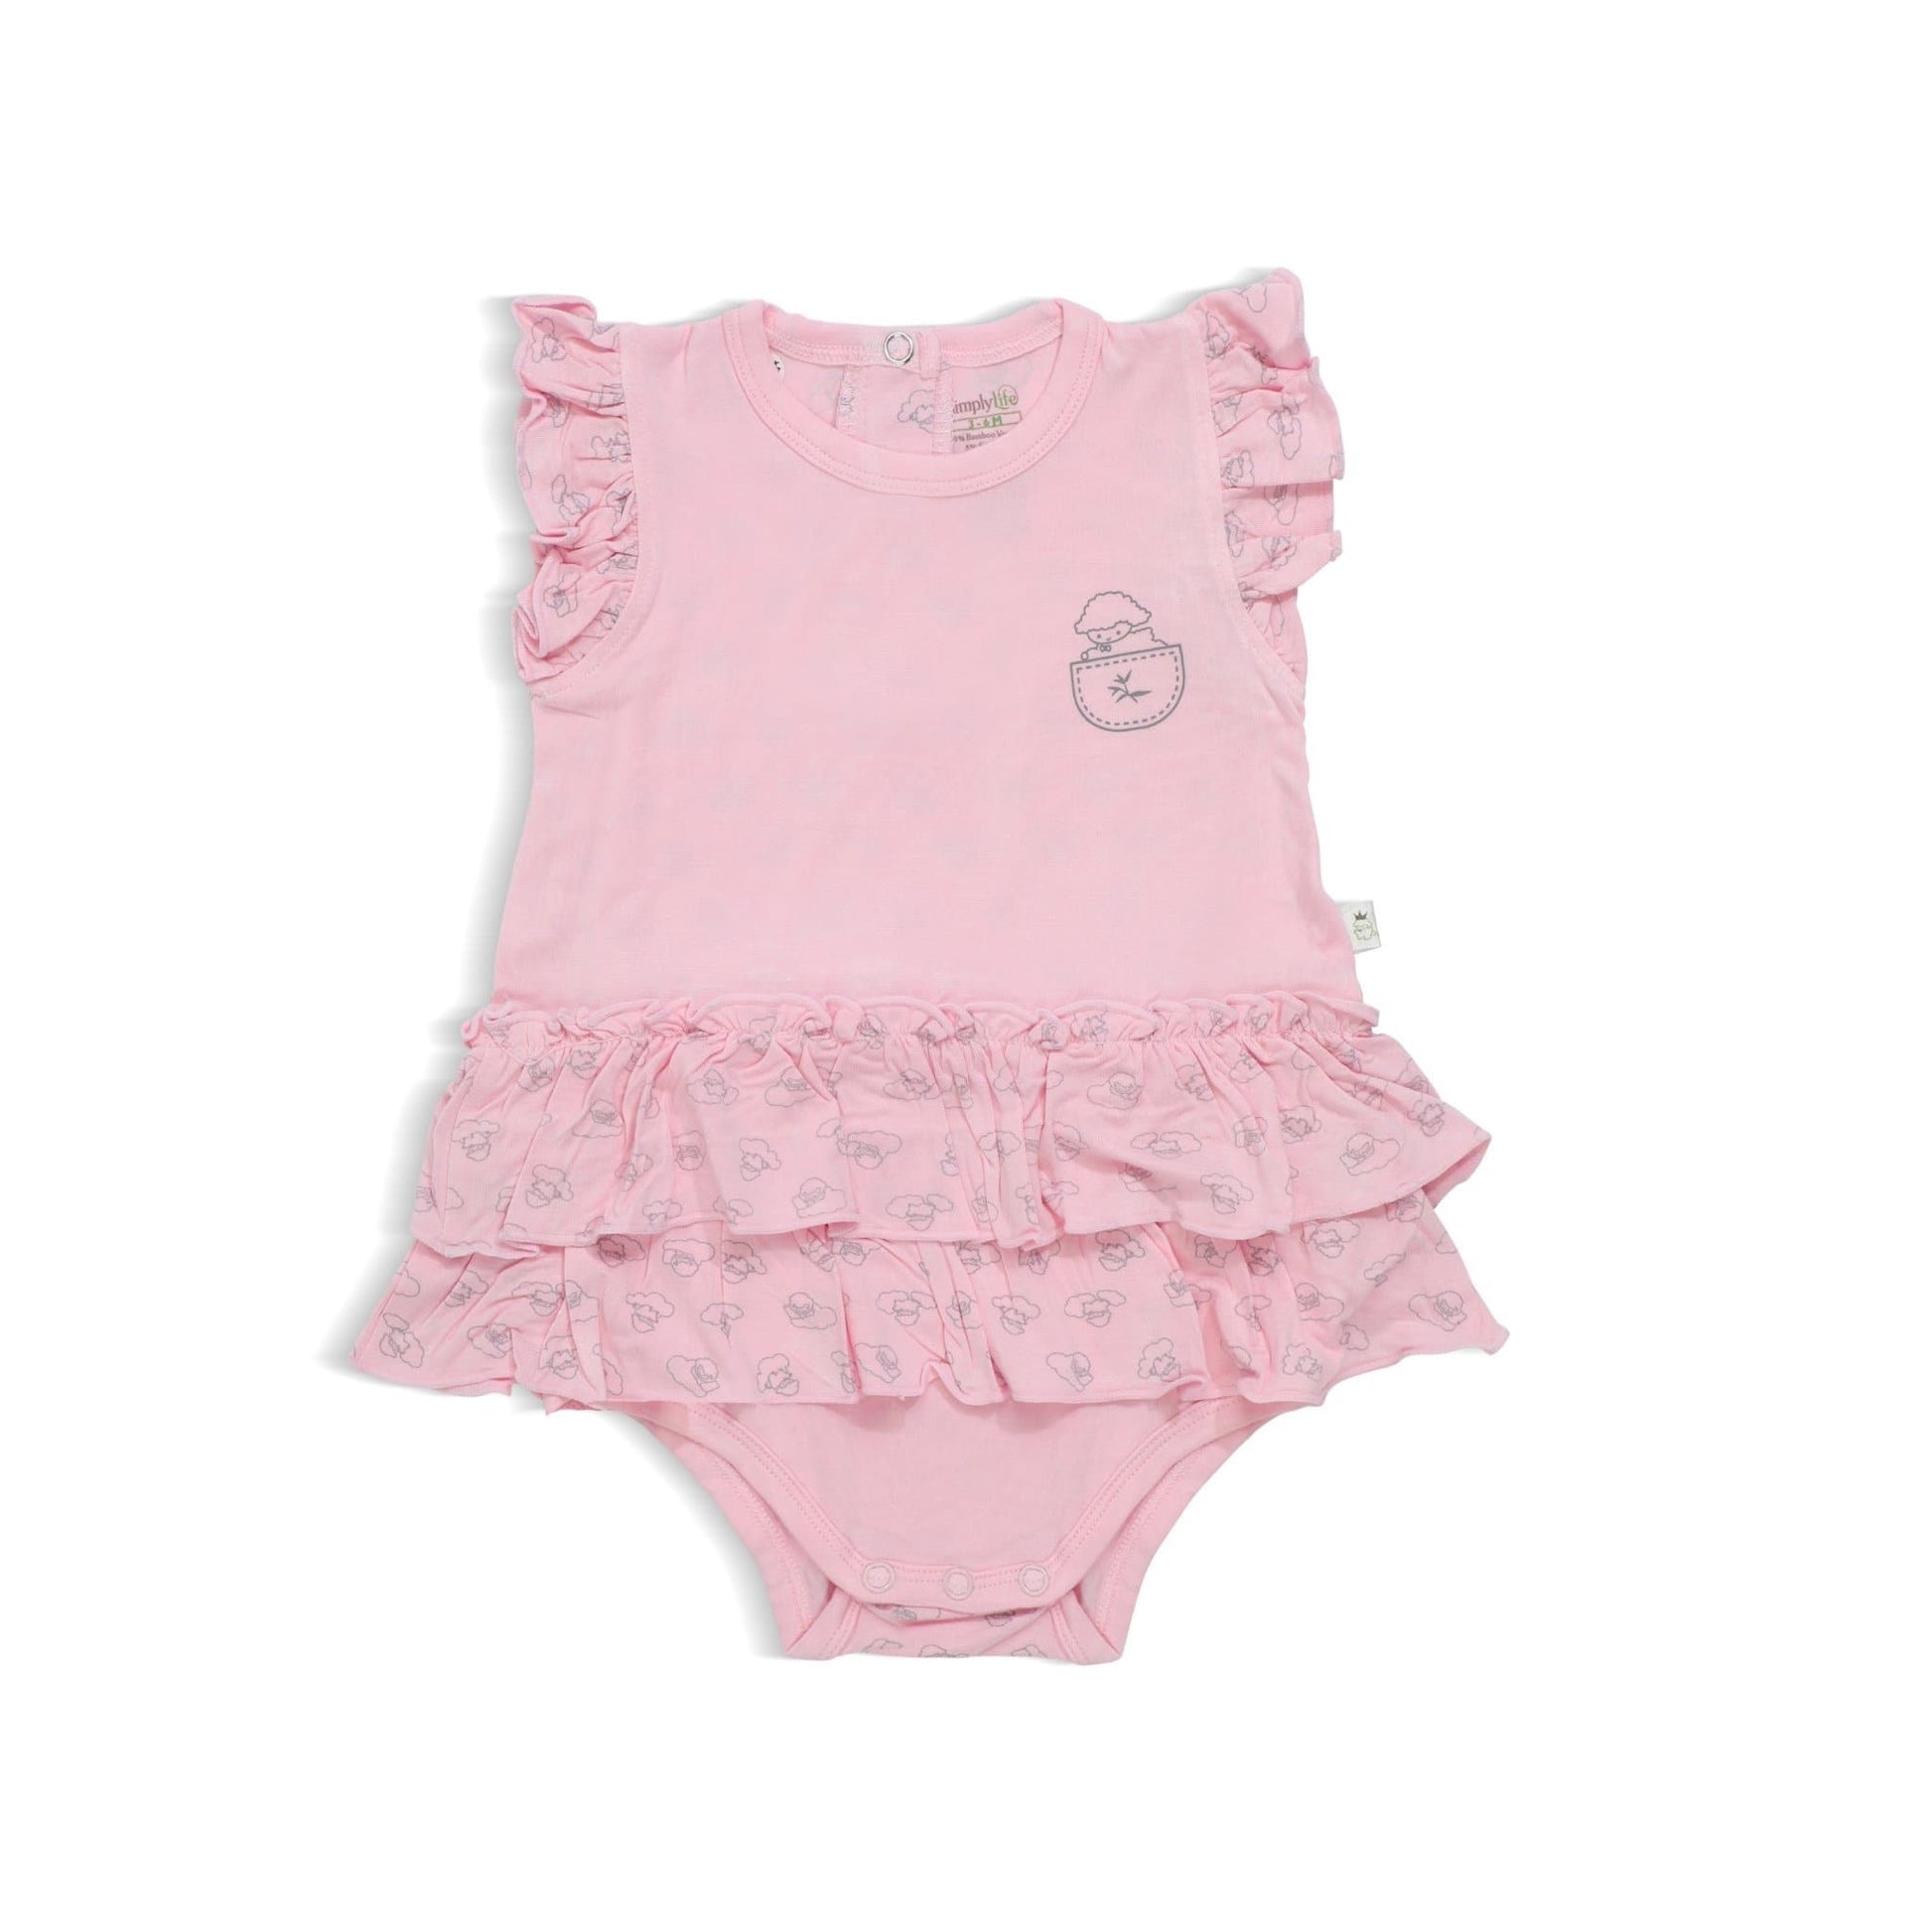 Adorable Lamb - Romper Dress with Frilled-sleeves and Double Frilled Bottom by simplylifebaby